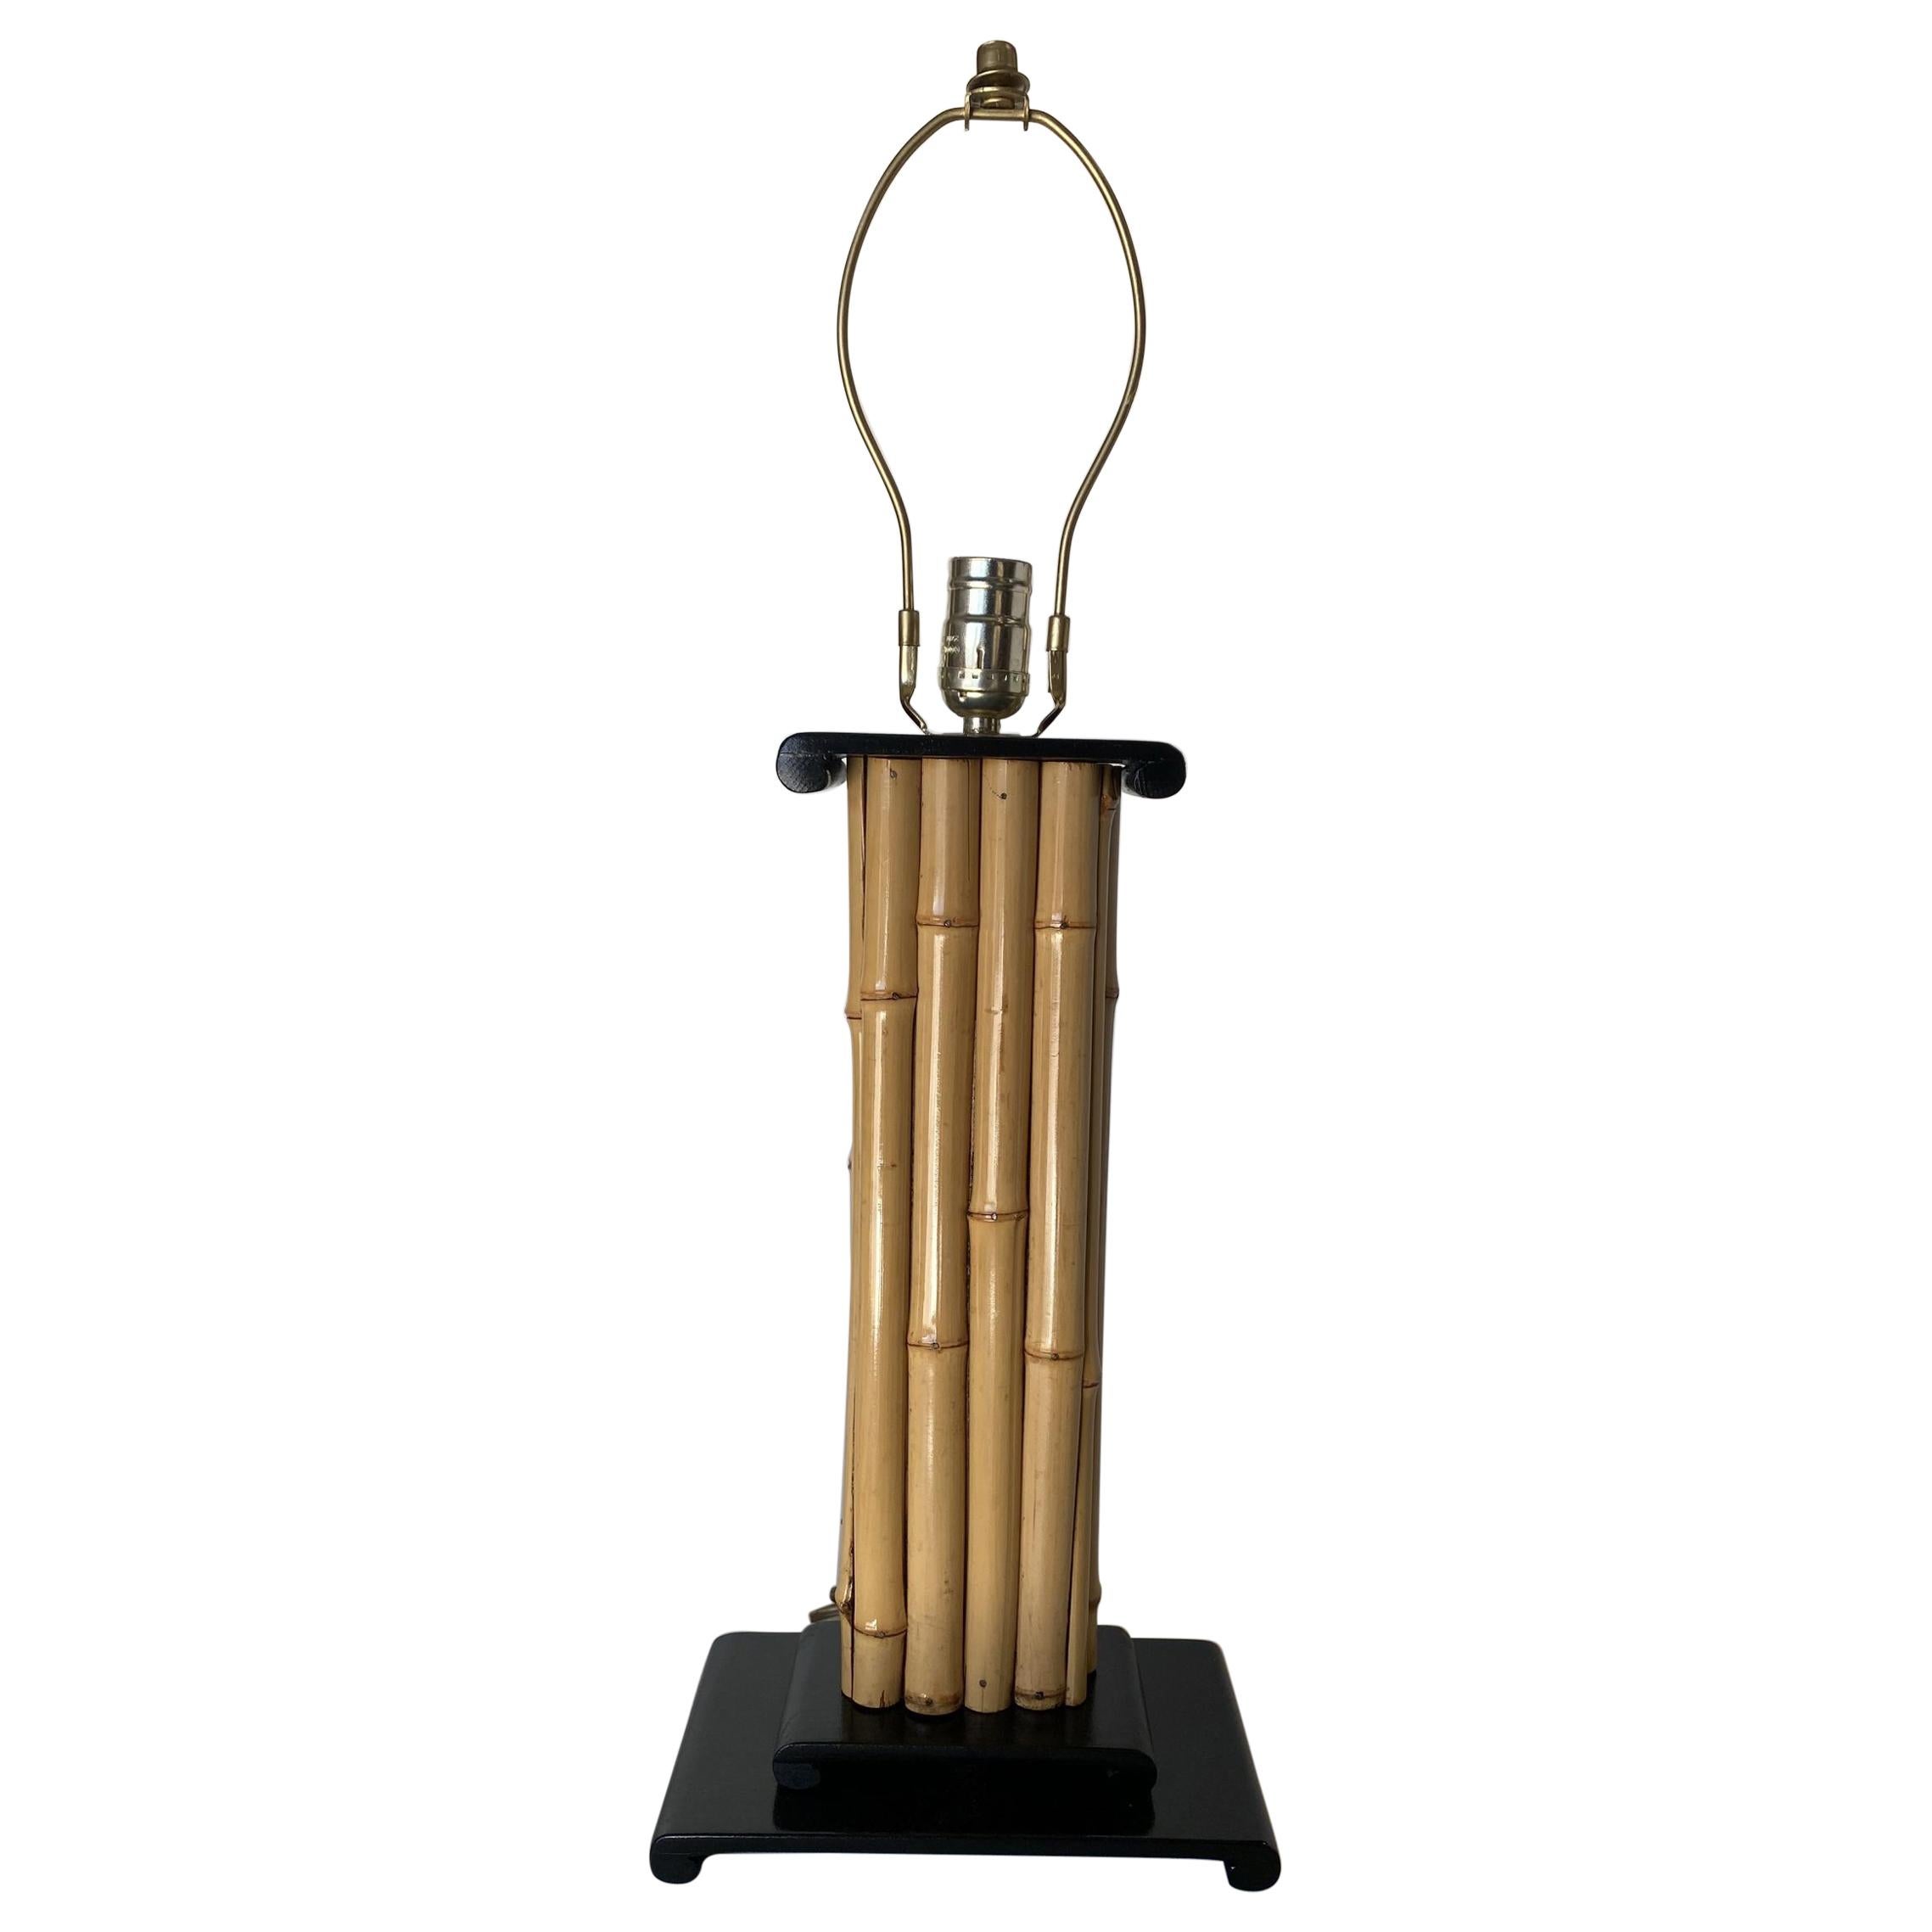 Restored Wrapped Rattan Pole Lamp with Black Lacquer Demi Base